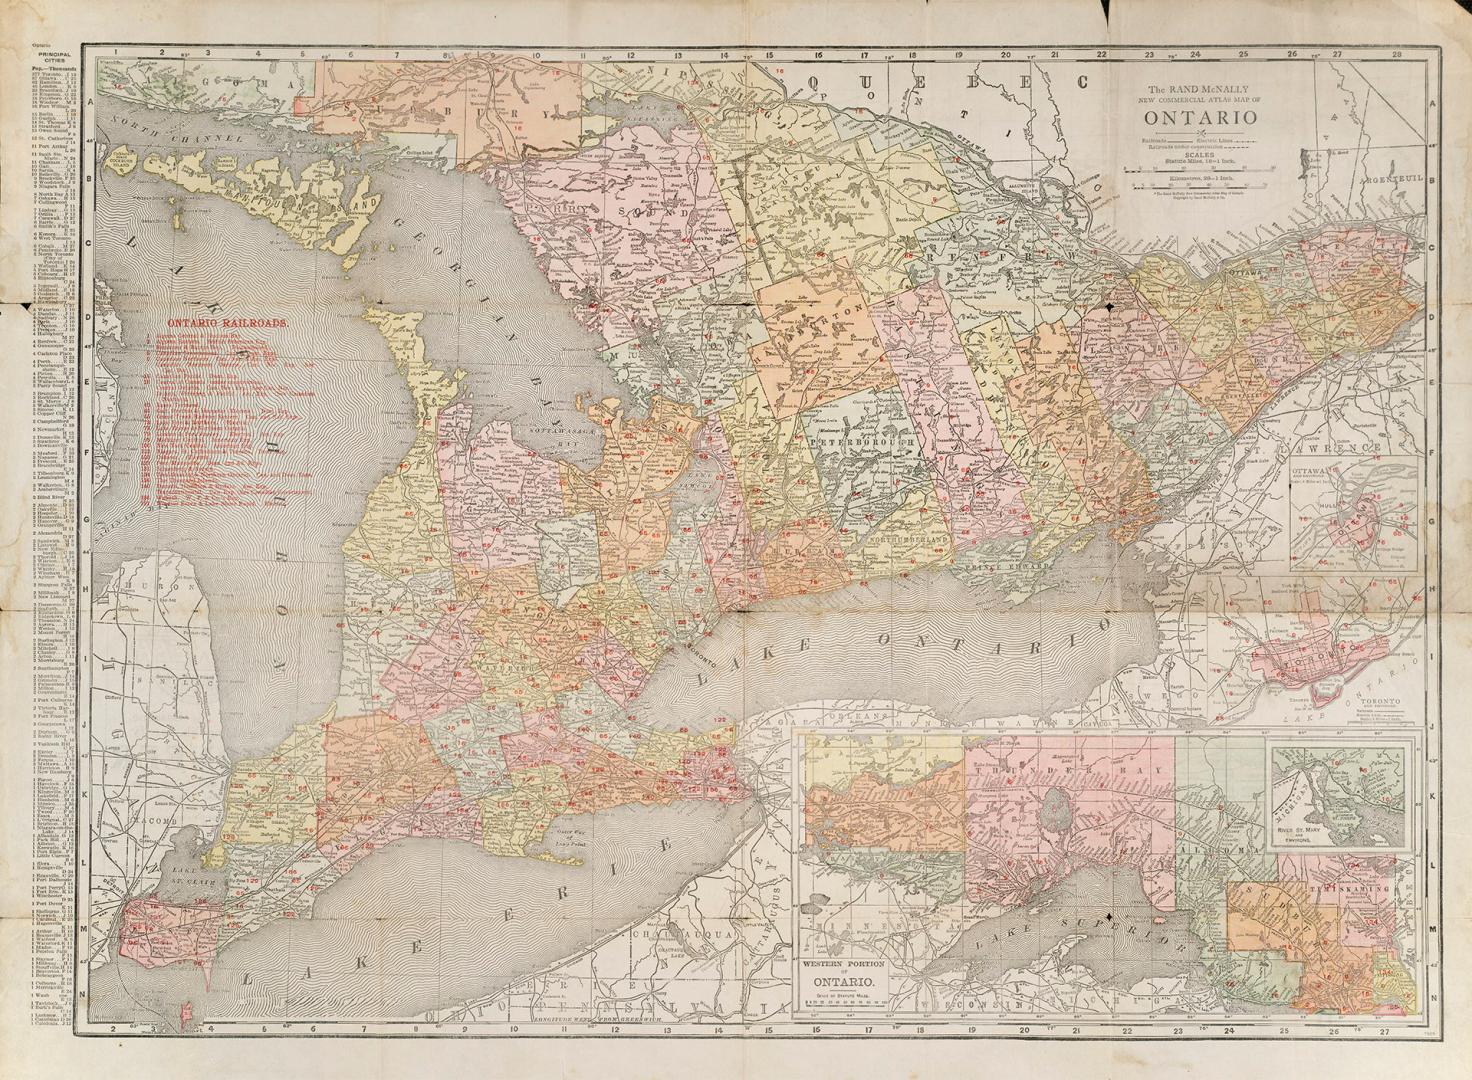 The Rand-McNally new commercial atlas map of Ontario